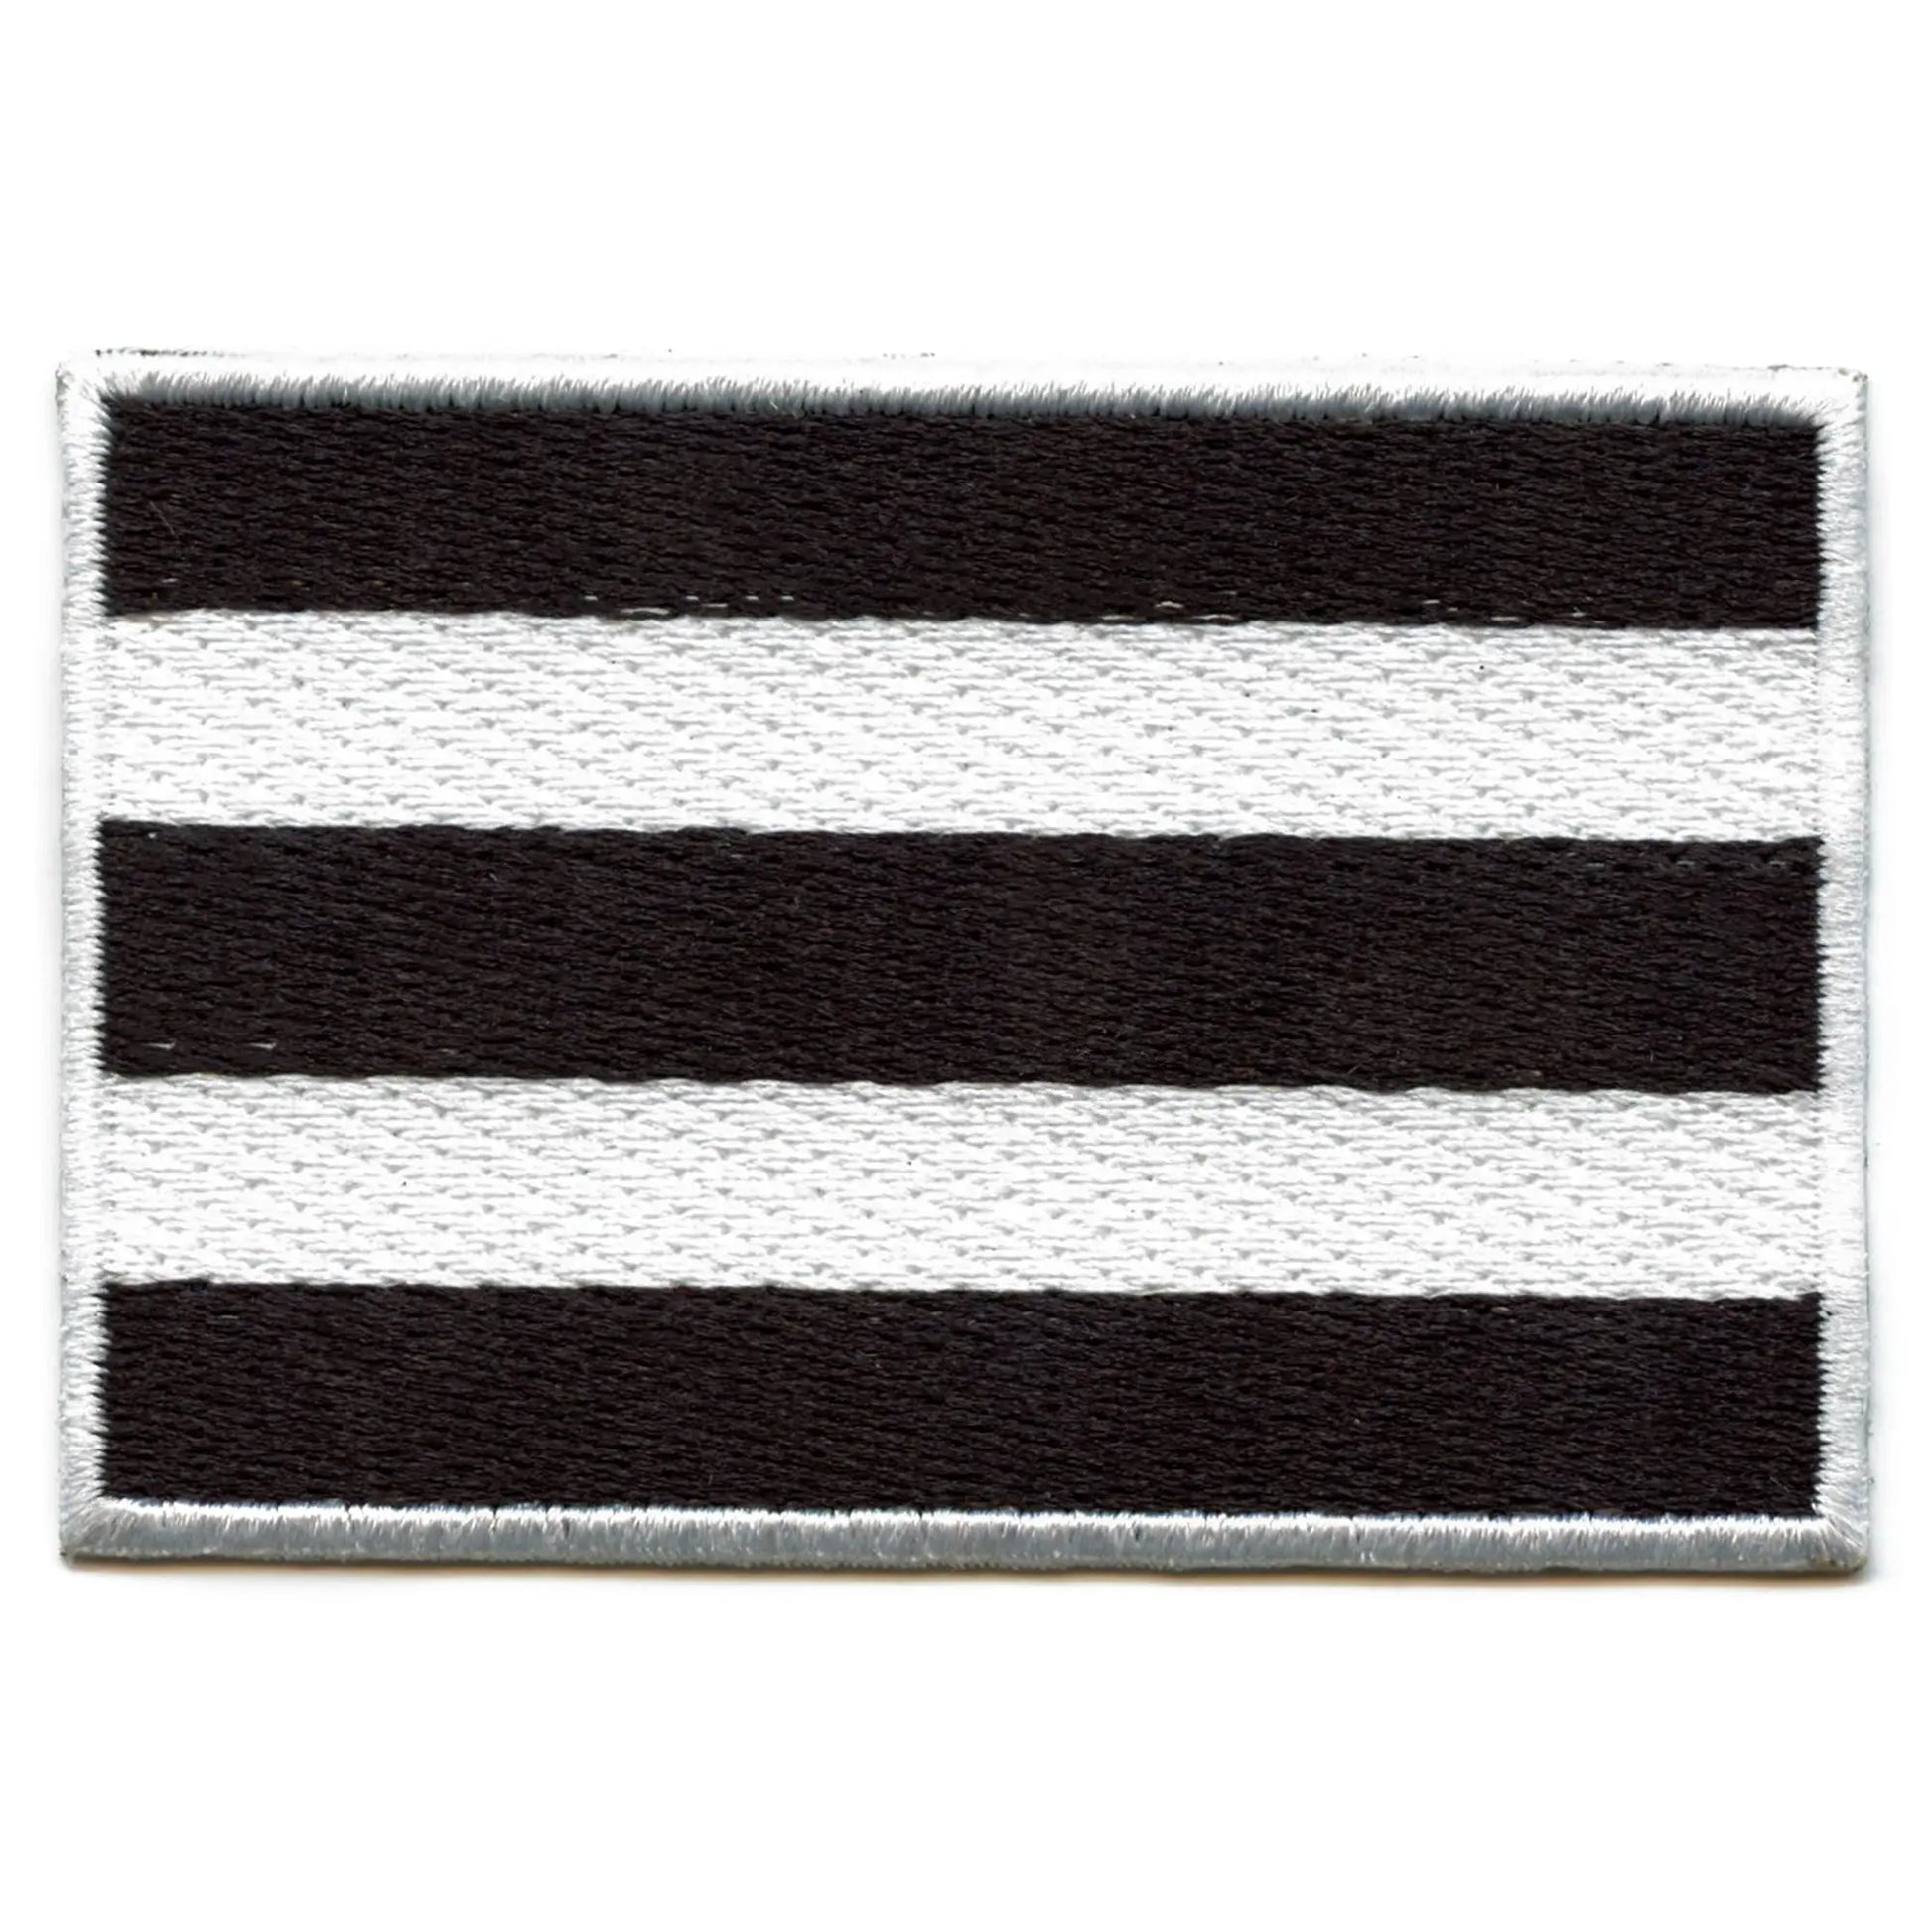 Heterosexual Straight Pride Embroidered Iron On Patch 